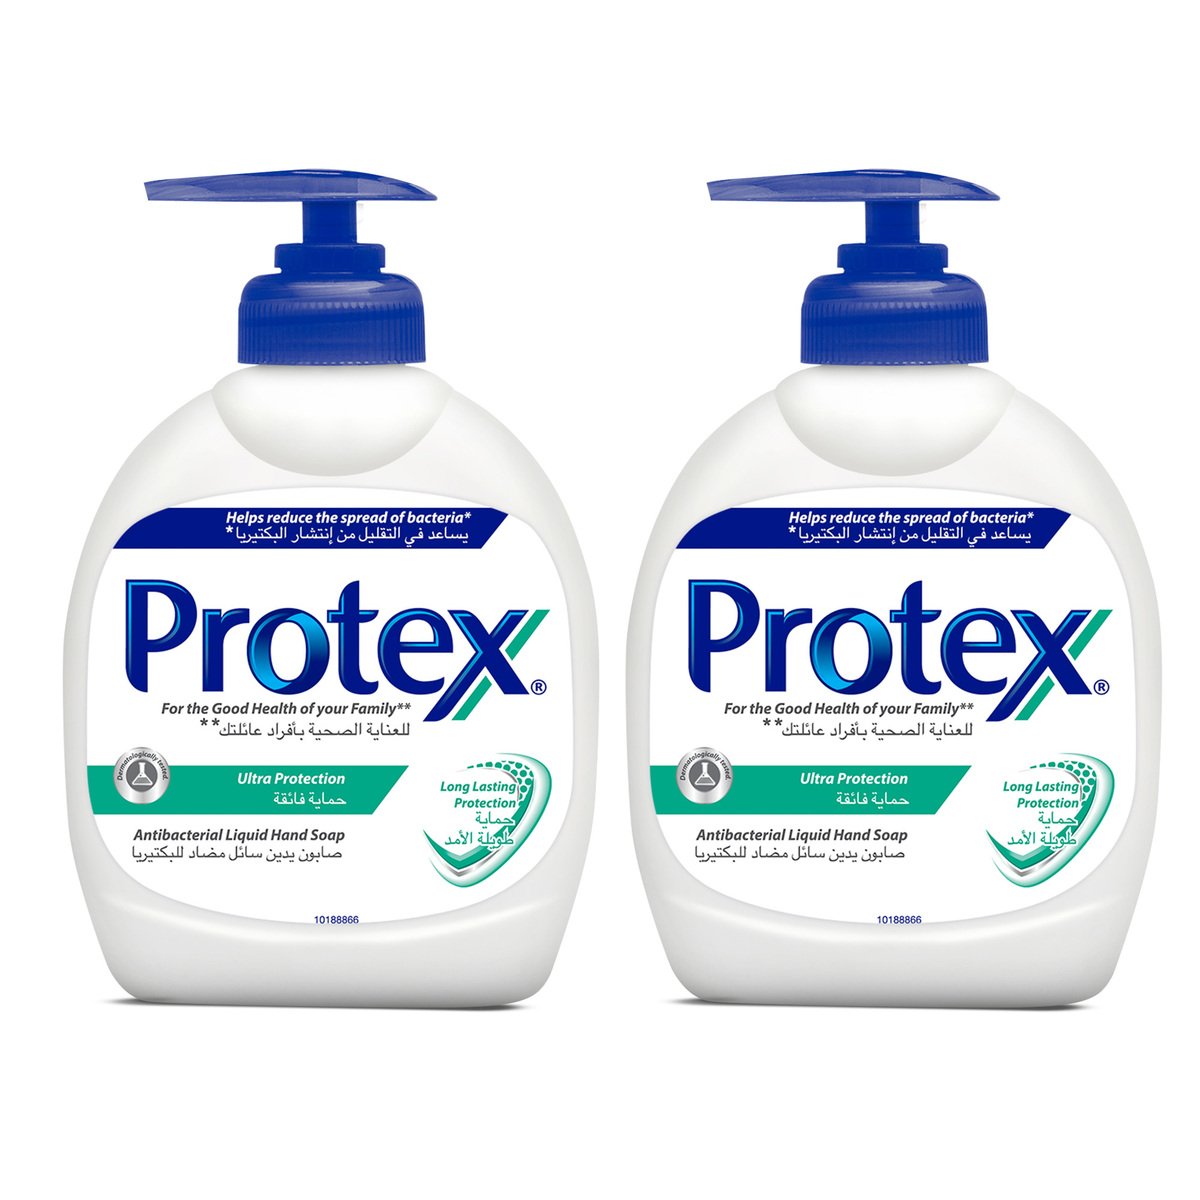 Protex Anti-Bacterial Liquid Hand Soap Ultra Protection 2 x 300 ml